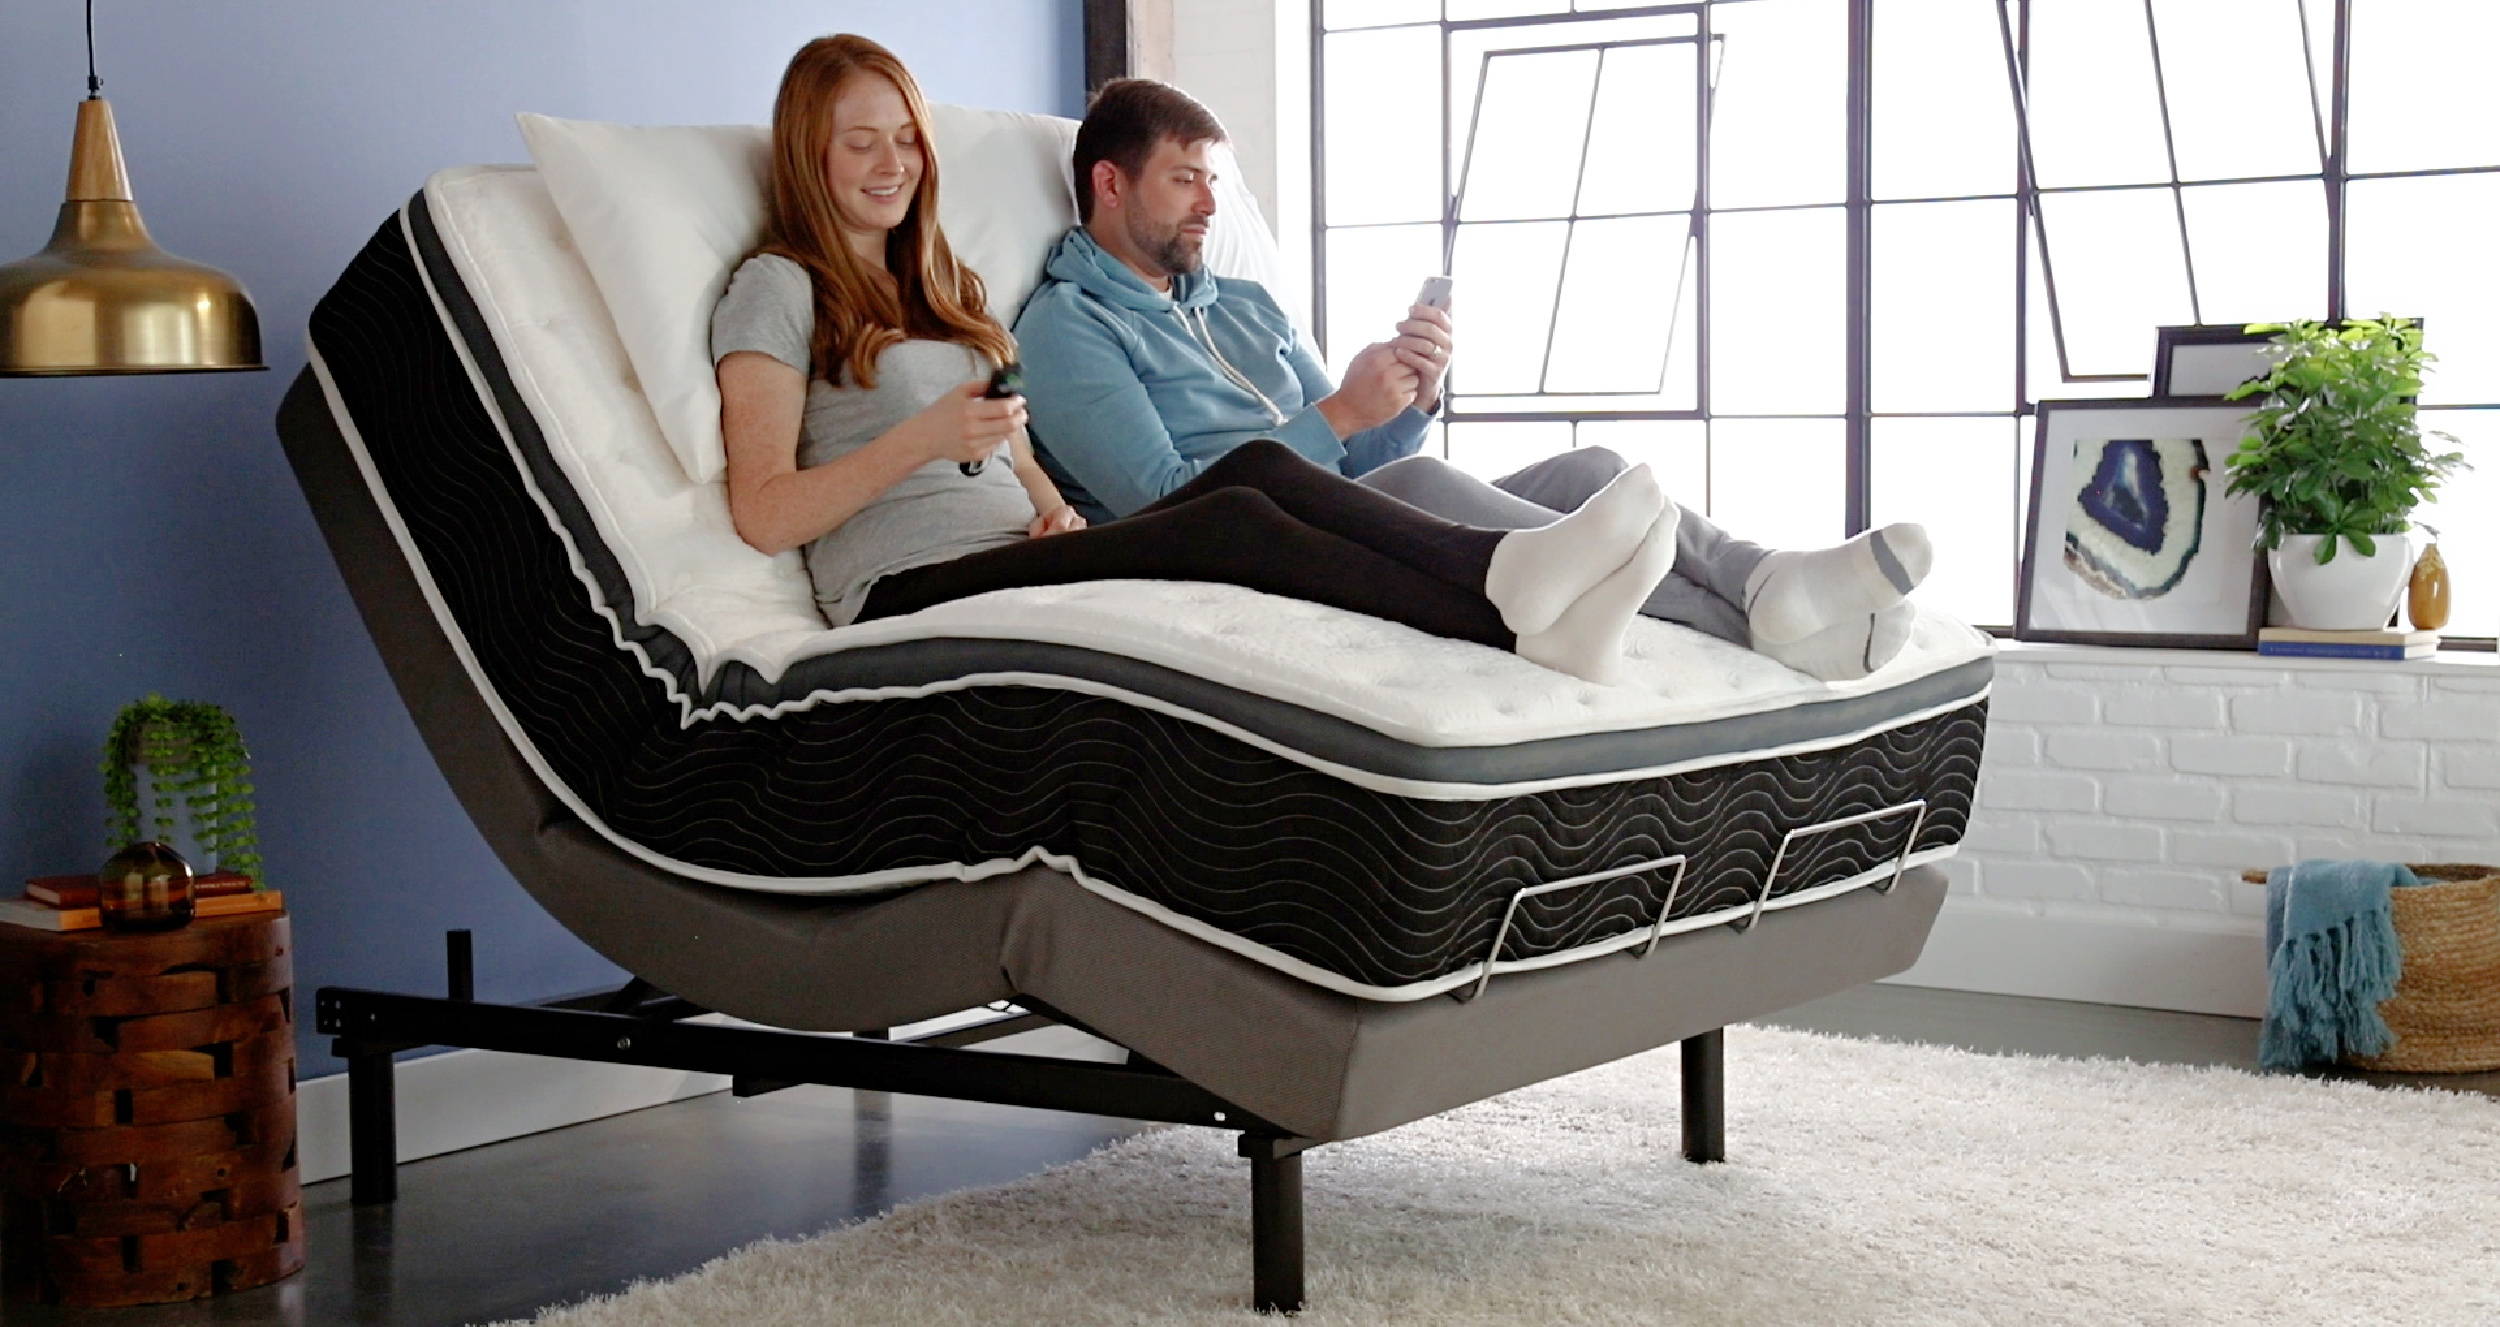 A couple relaxing on a mattress with the iTilt adjustable base in a lounge position, watching TV.